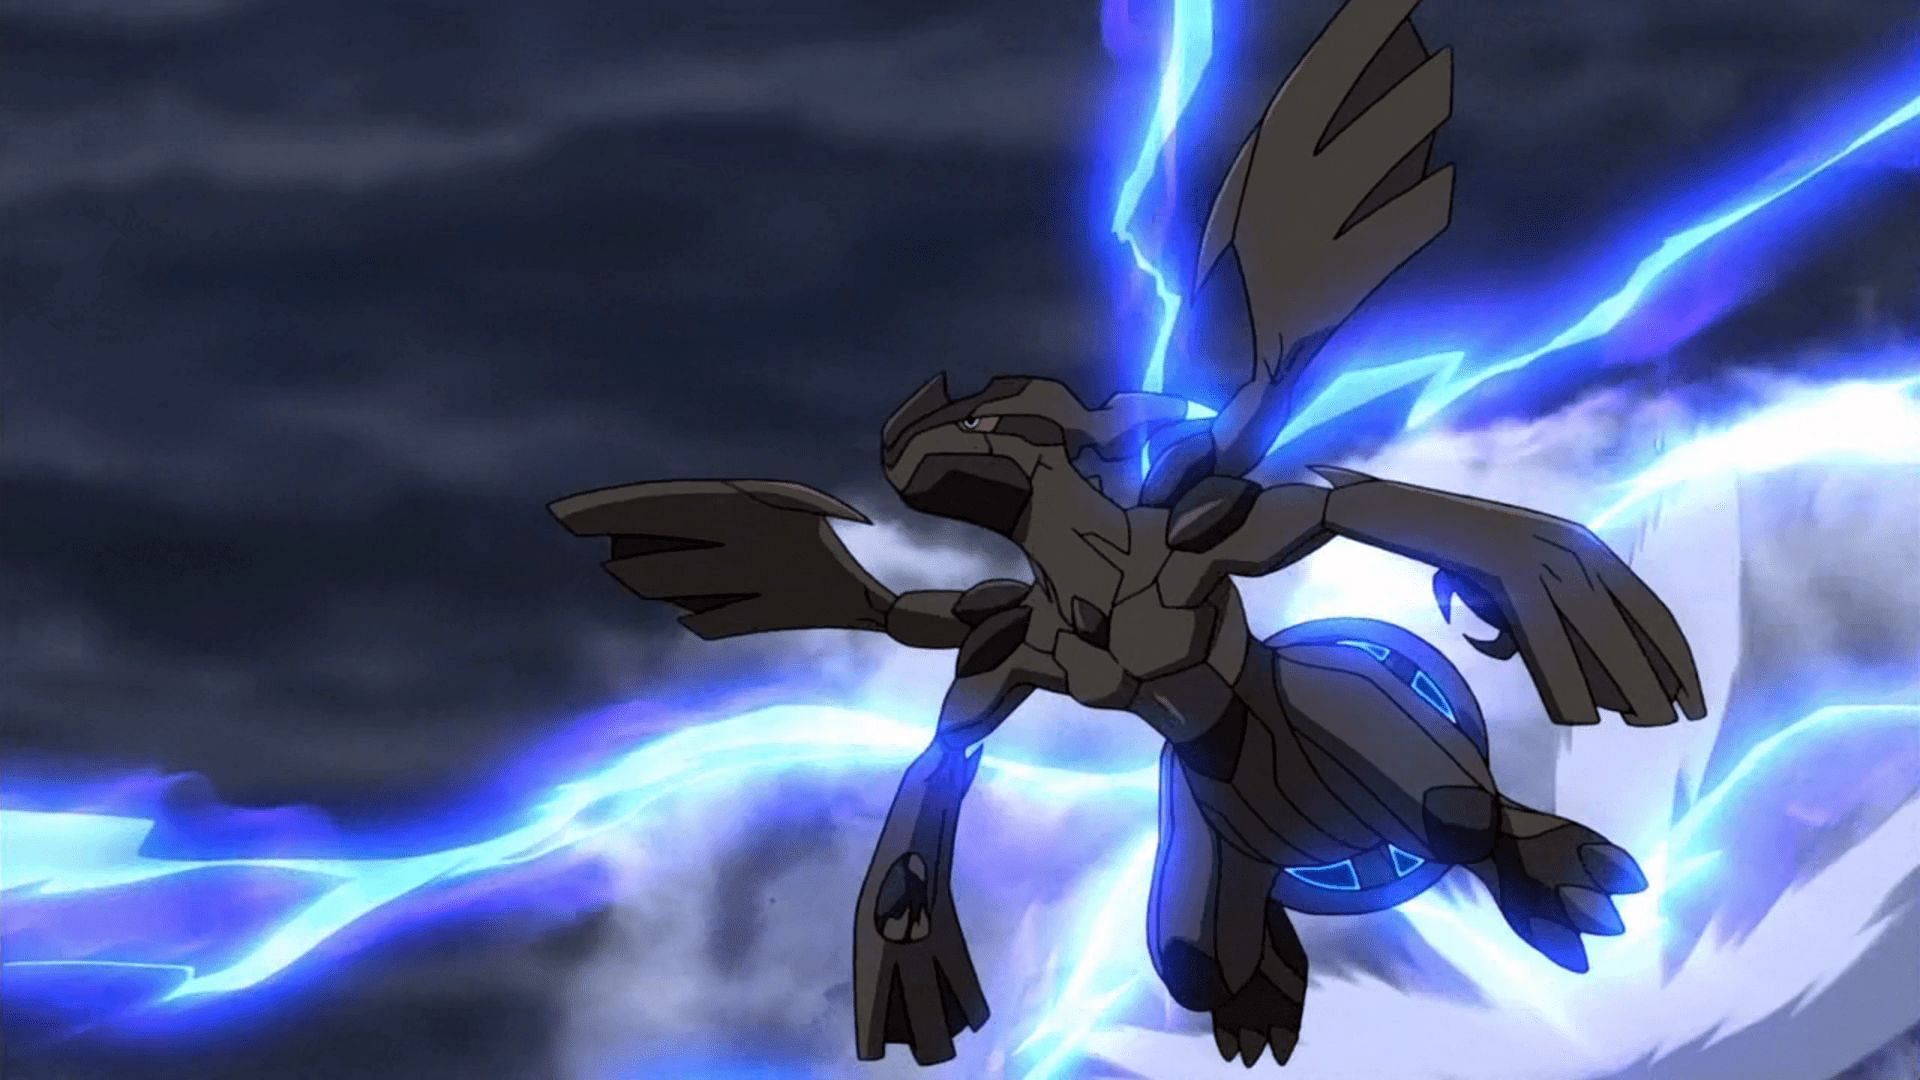 Zekrom as it appears in the anime (Image via The Pokemon Company)